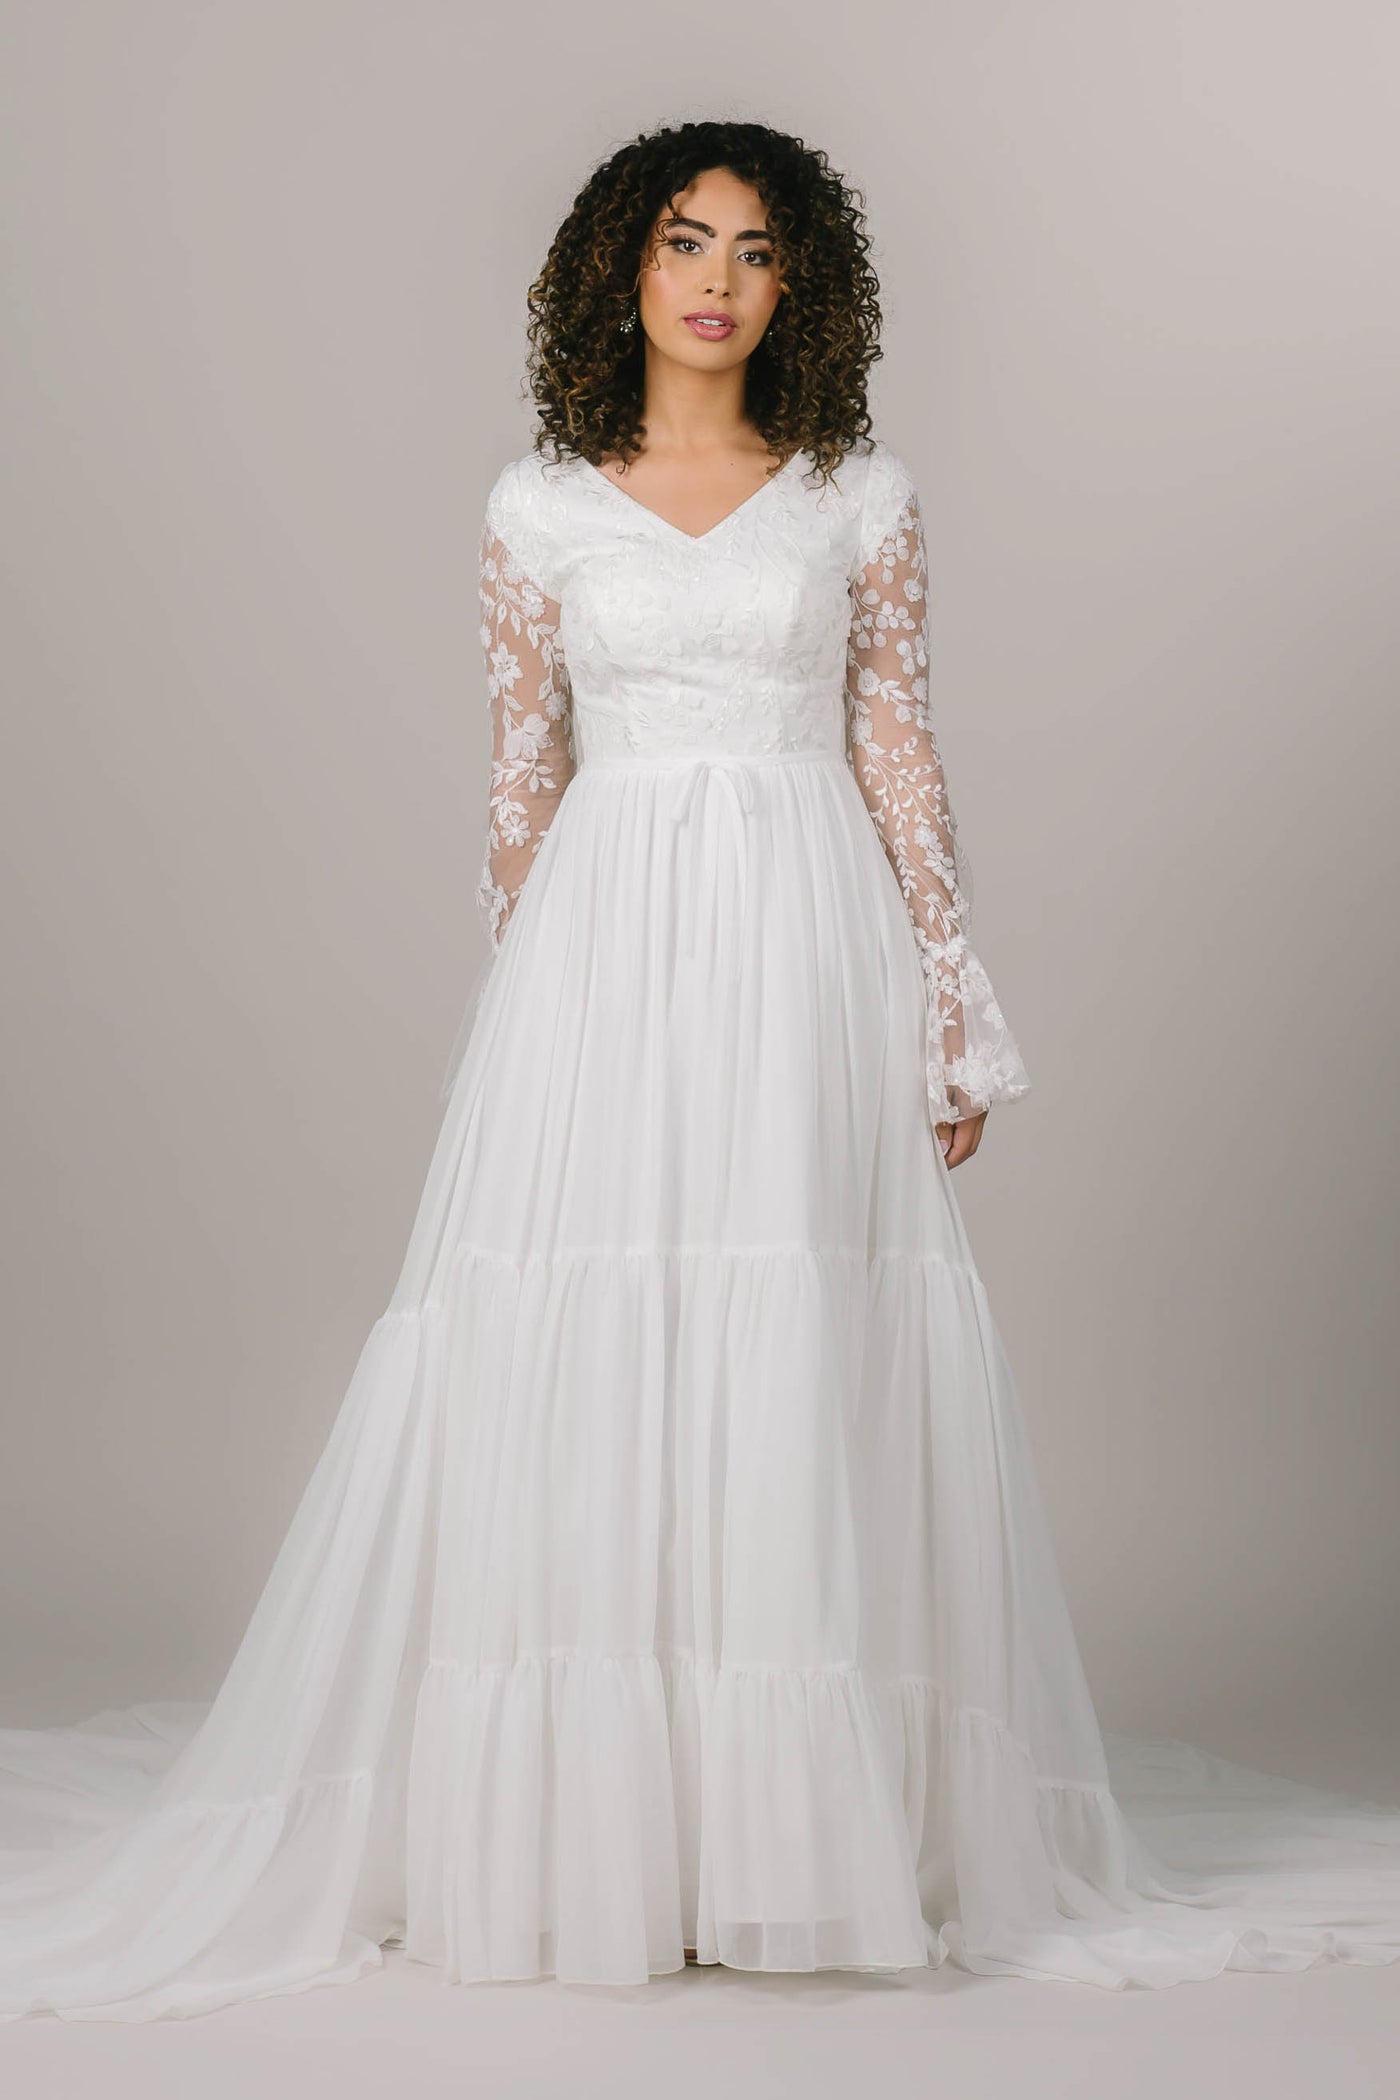 This is a modest wedding dress with a v neckline, sheer flowery sleeves, and a tiered a line skirt.